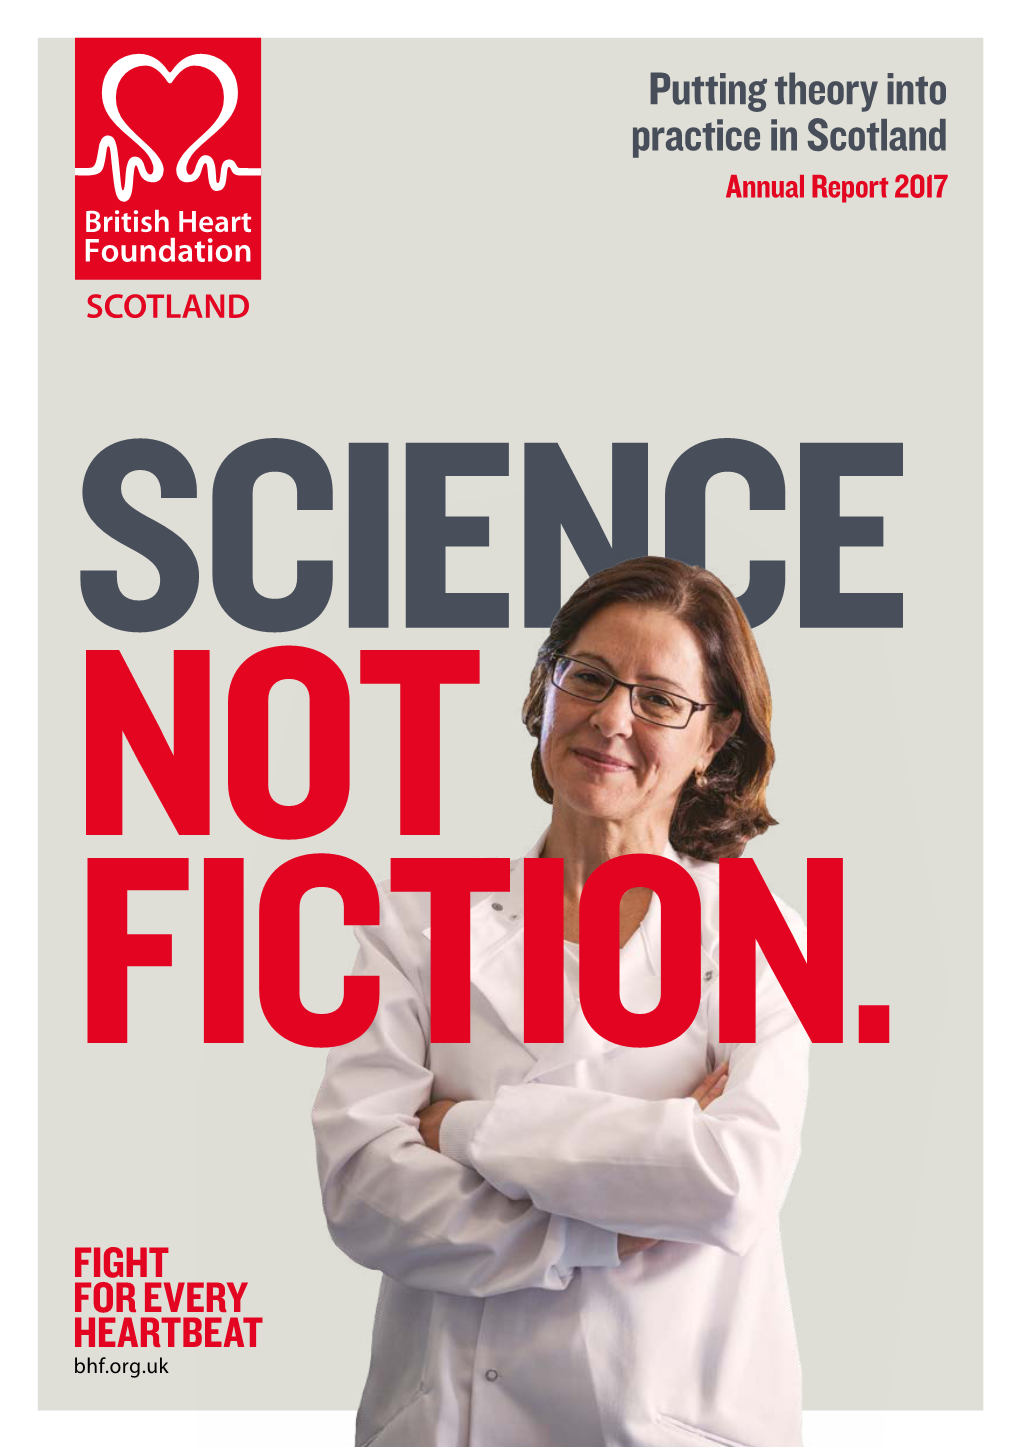 Putting Theory Into Practice in Scotland Annual Report 2017 SCIENCE NOT FICTION